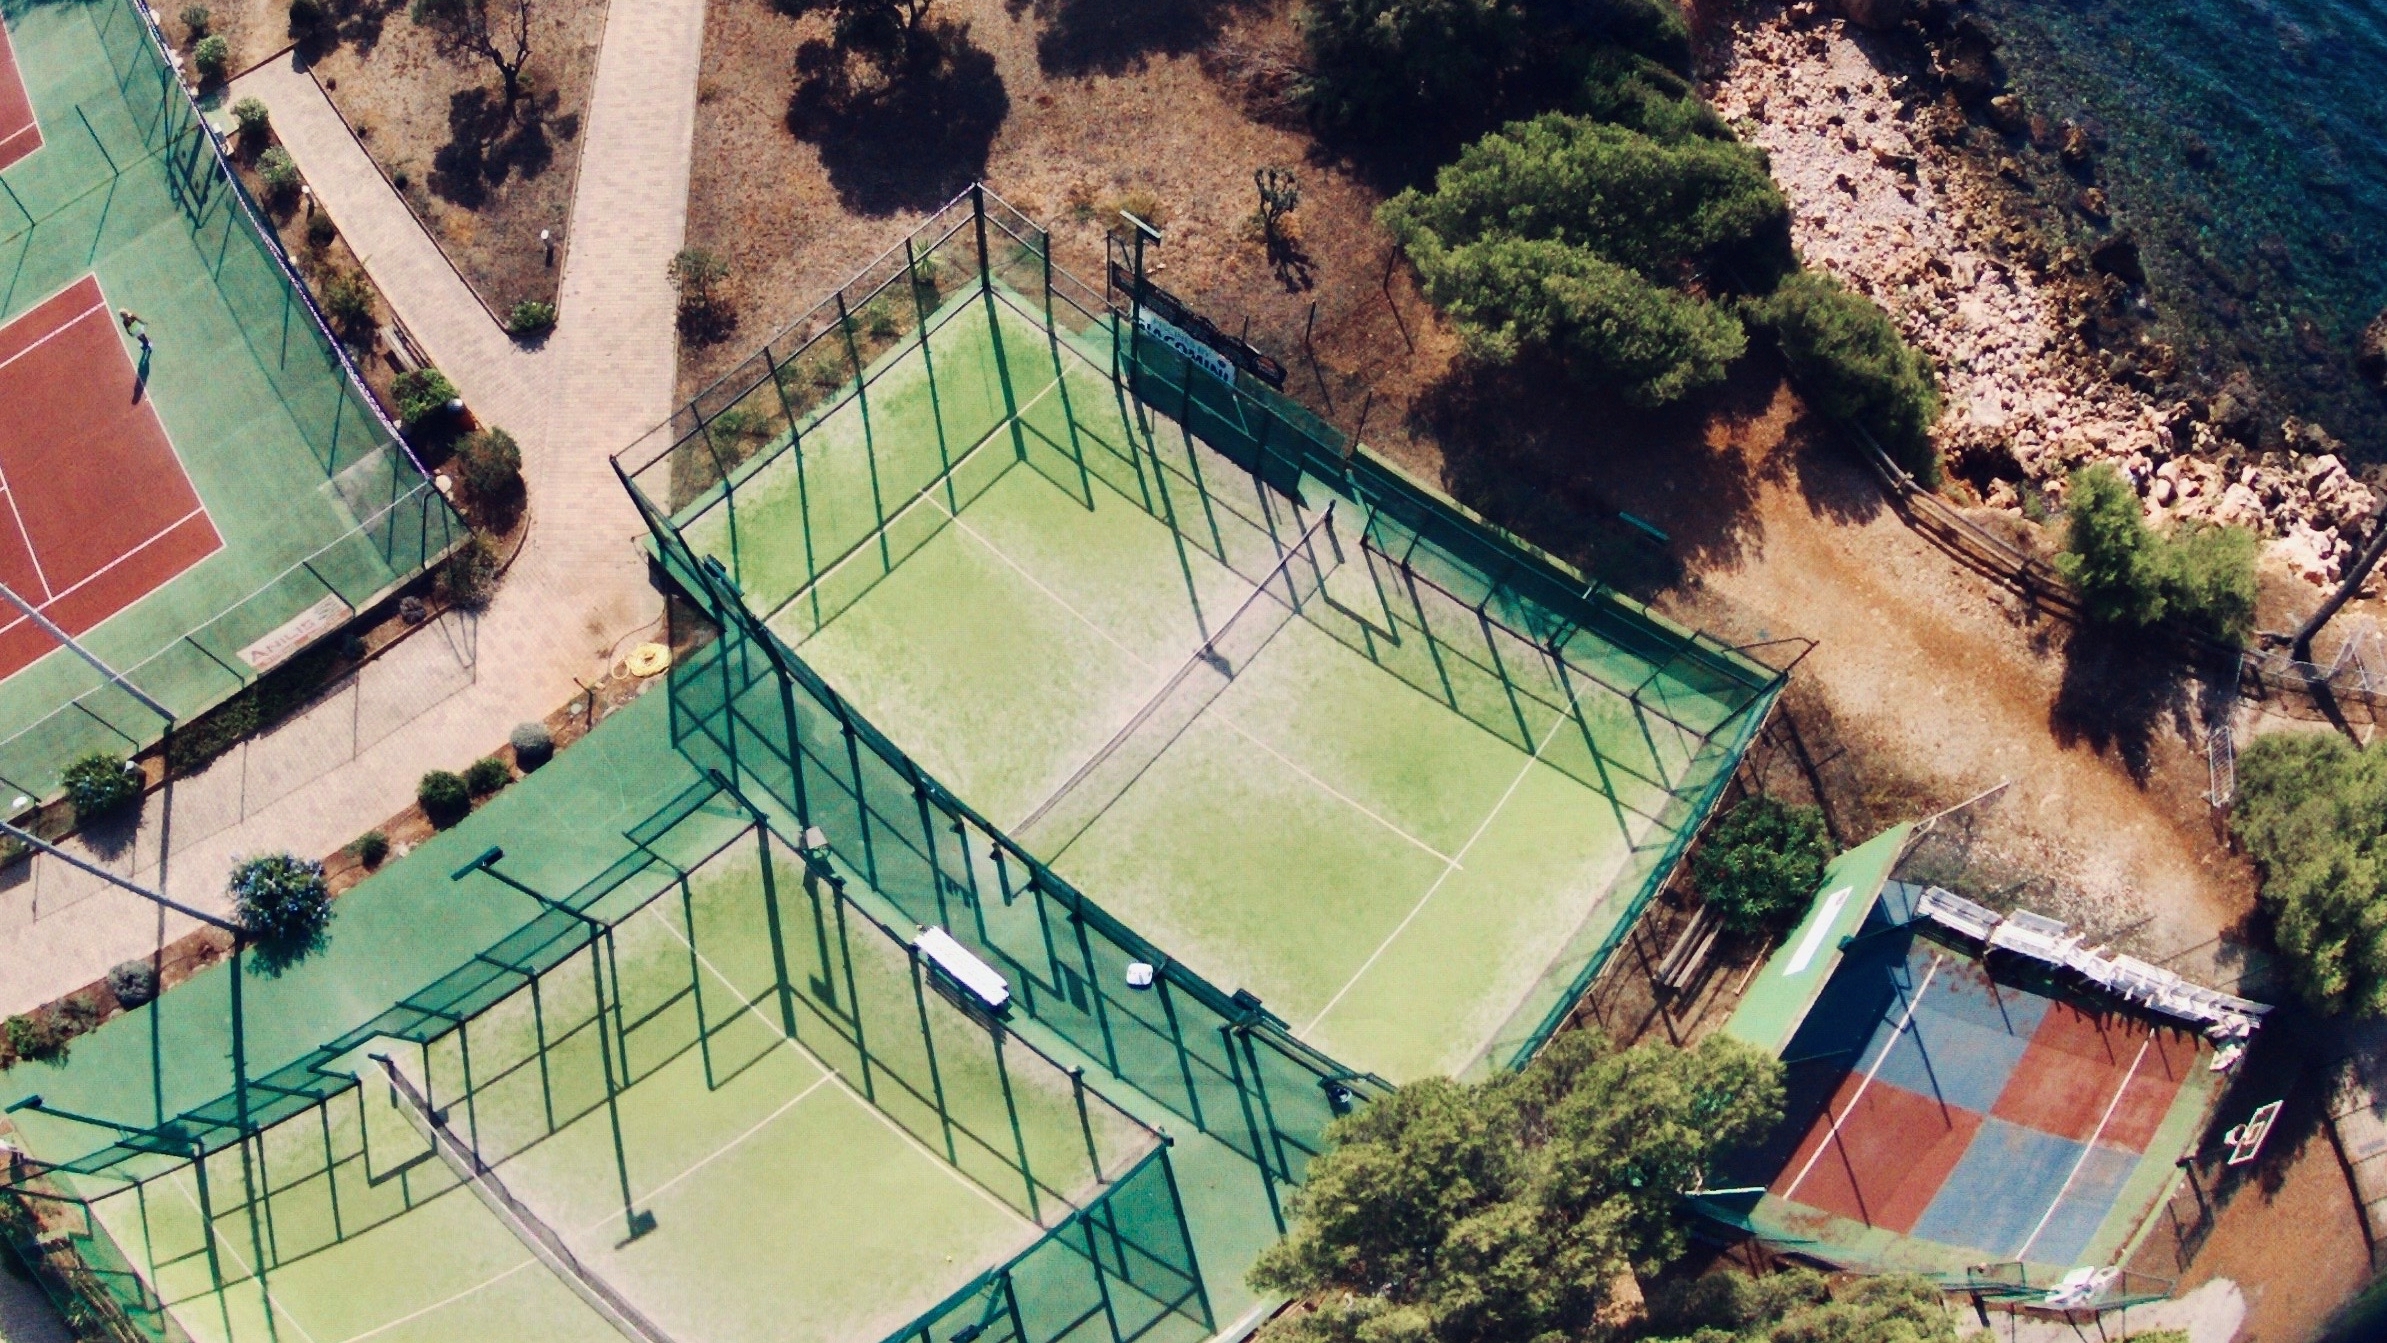 Bandol Tennis Club: a first P1000 from May